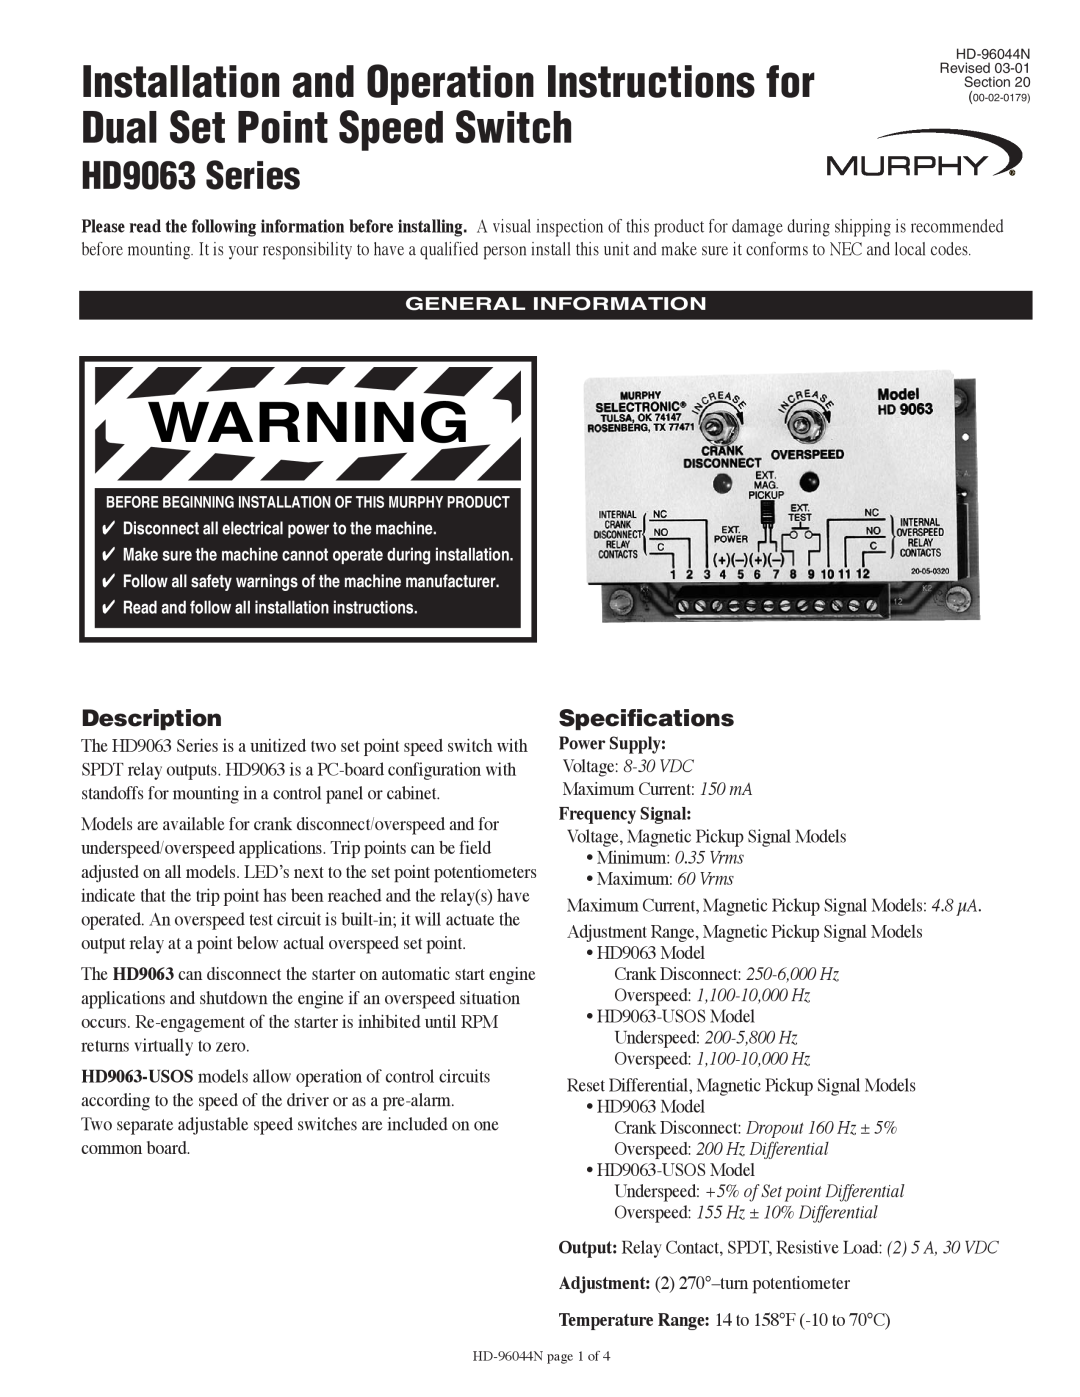 Murphy HD9063 Series specifications Description, Specifications, Power Supply, Frequency Signal, Overspeed 1,100-10,000 Hz 